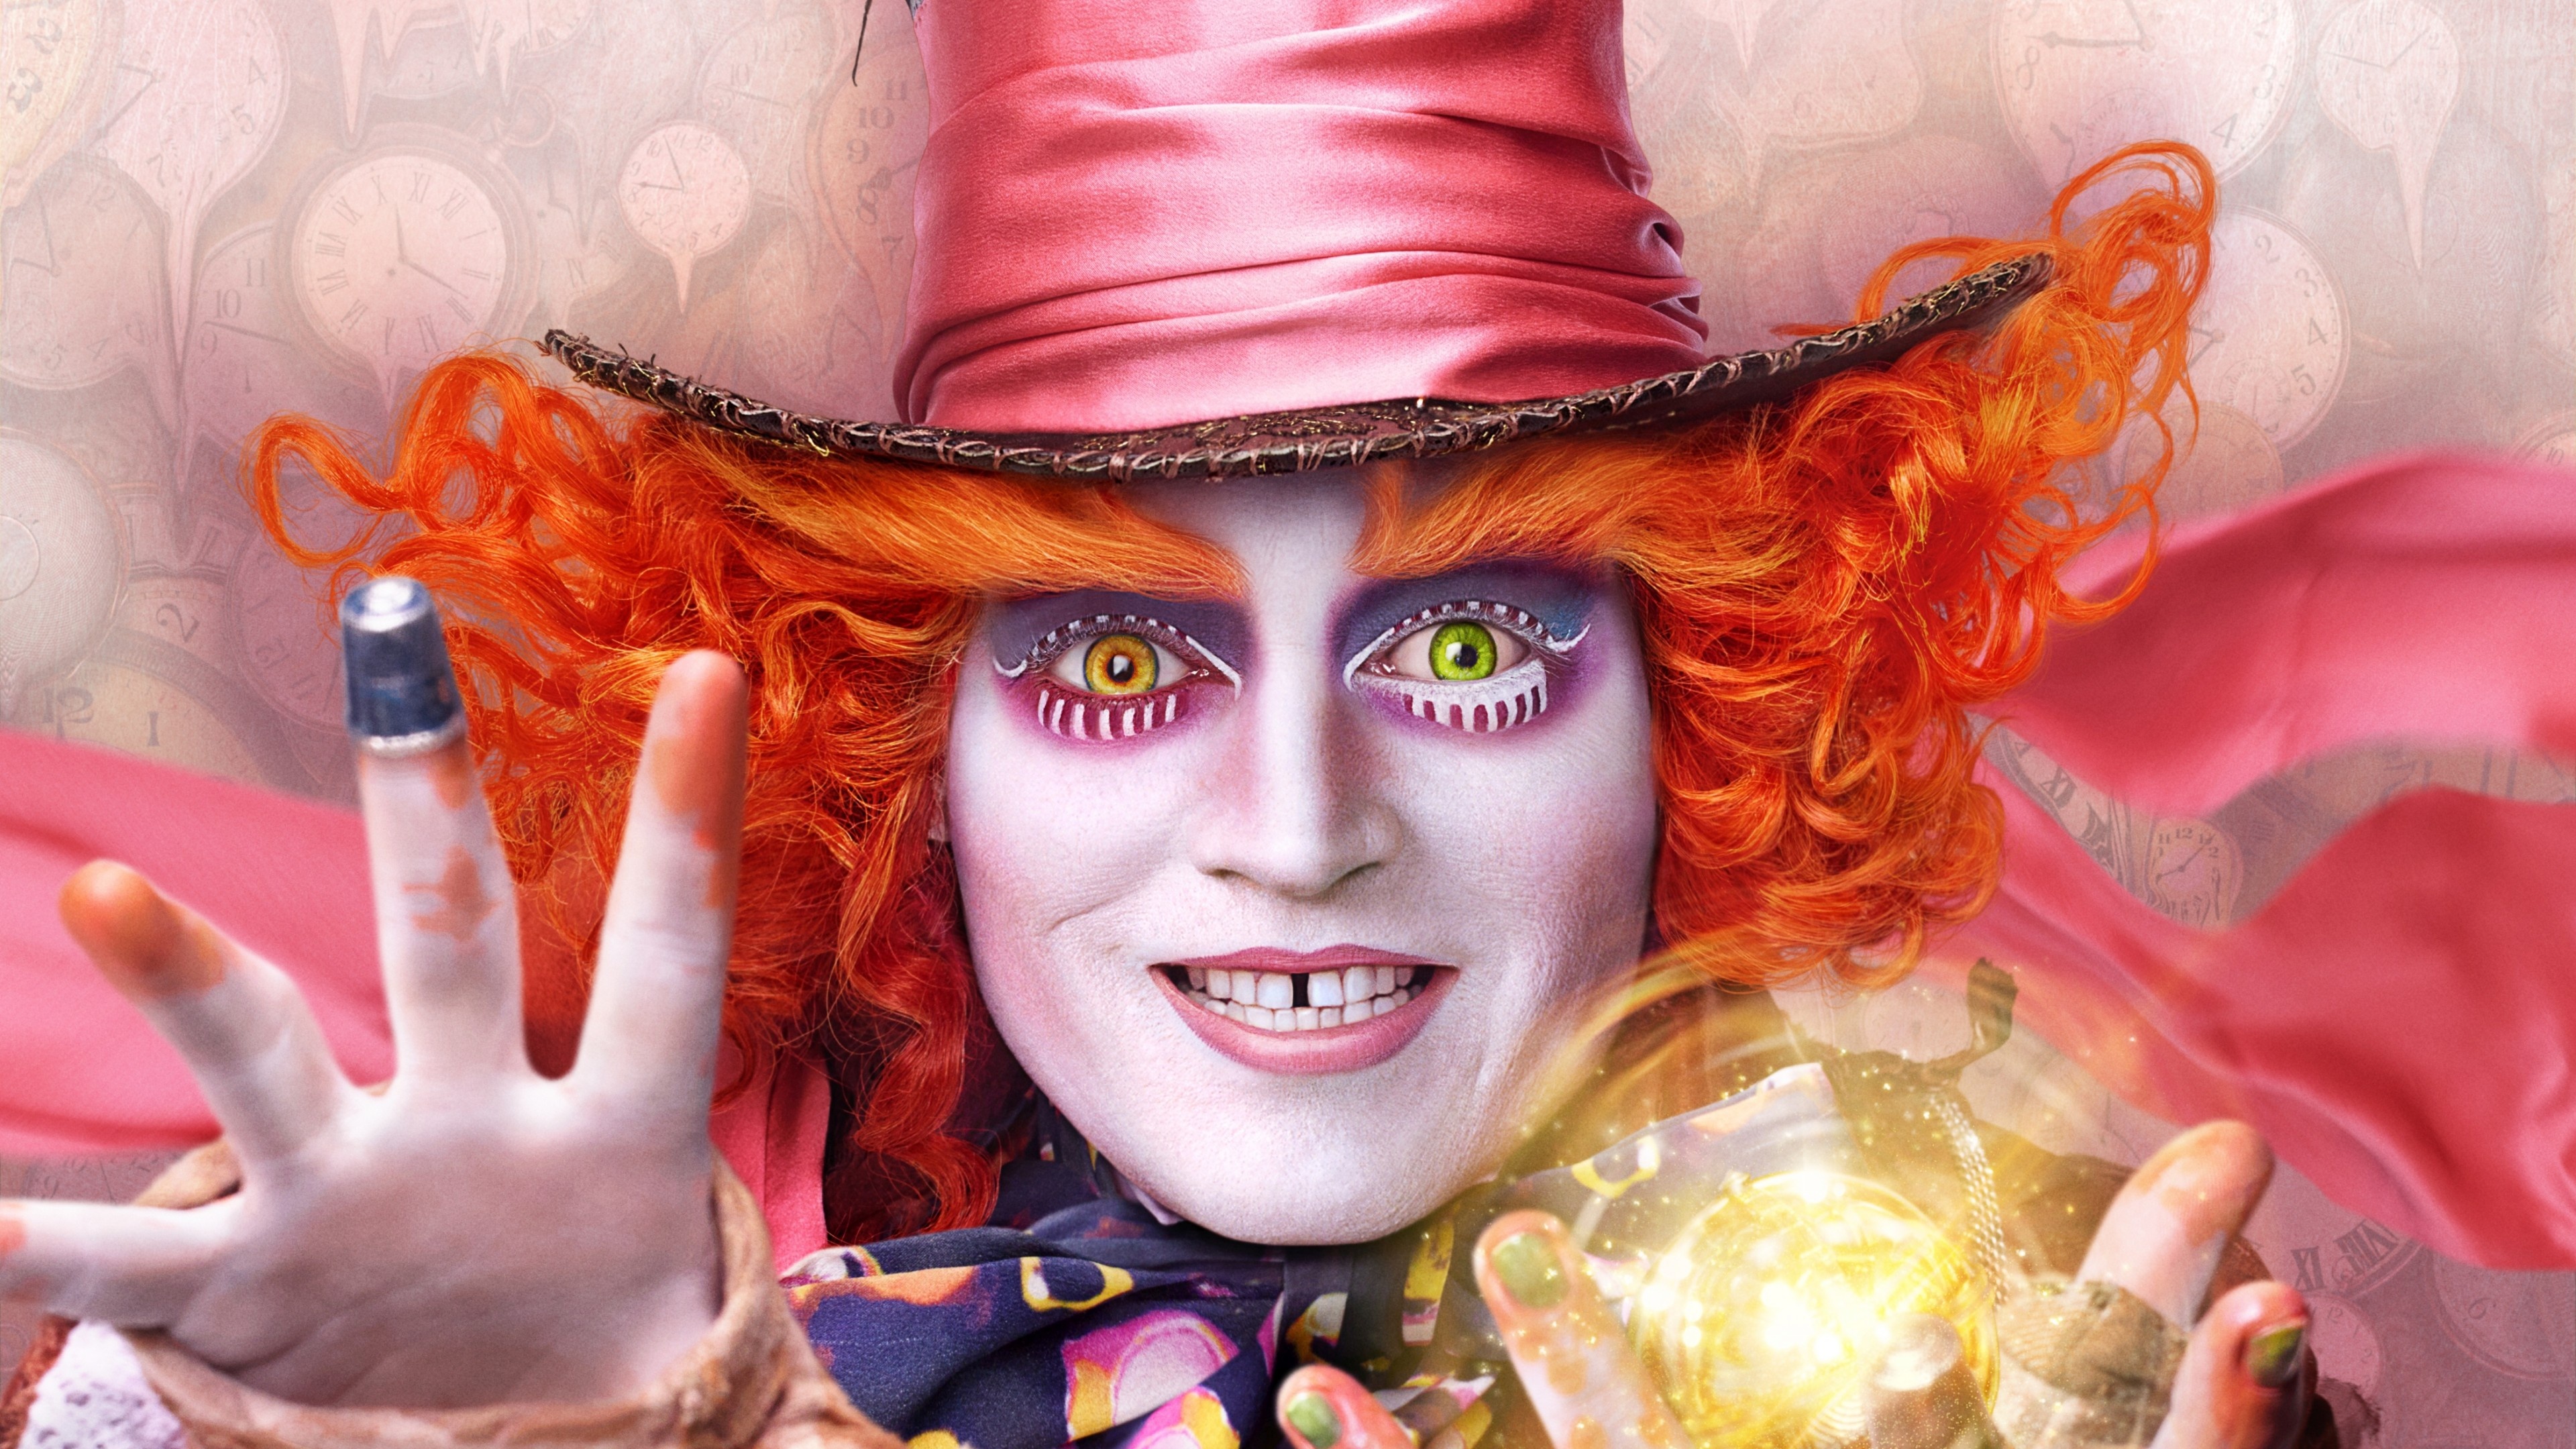 Johnny Depp: Alice Through the Looking Glass, The Mad Hatter, a fictional character. 3840x2160 4K Background.